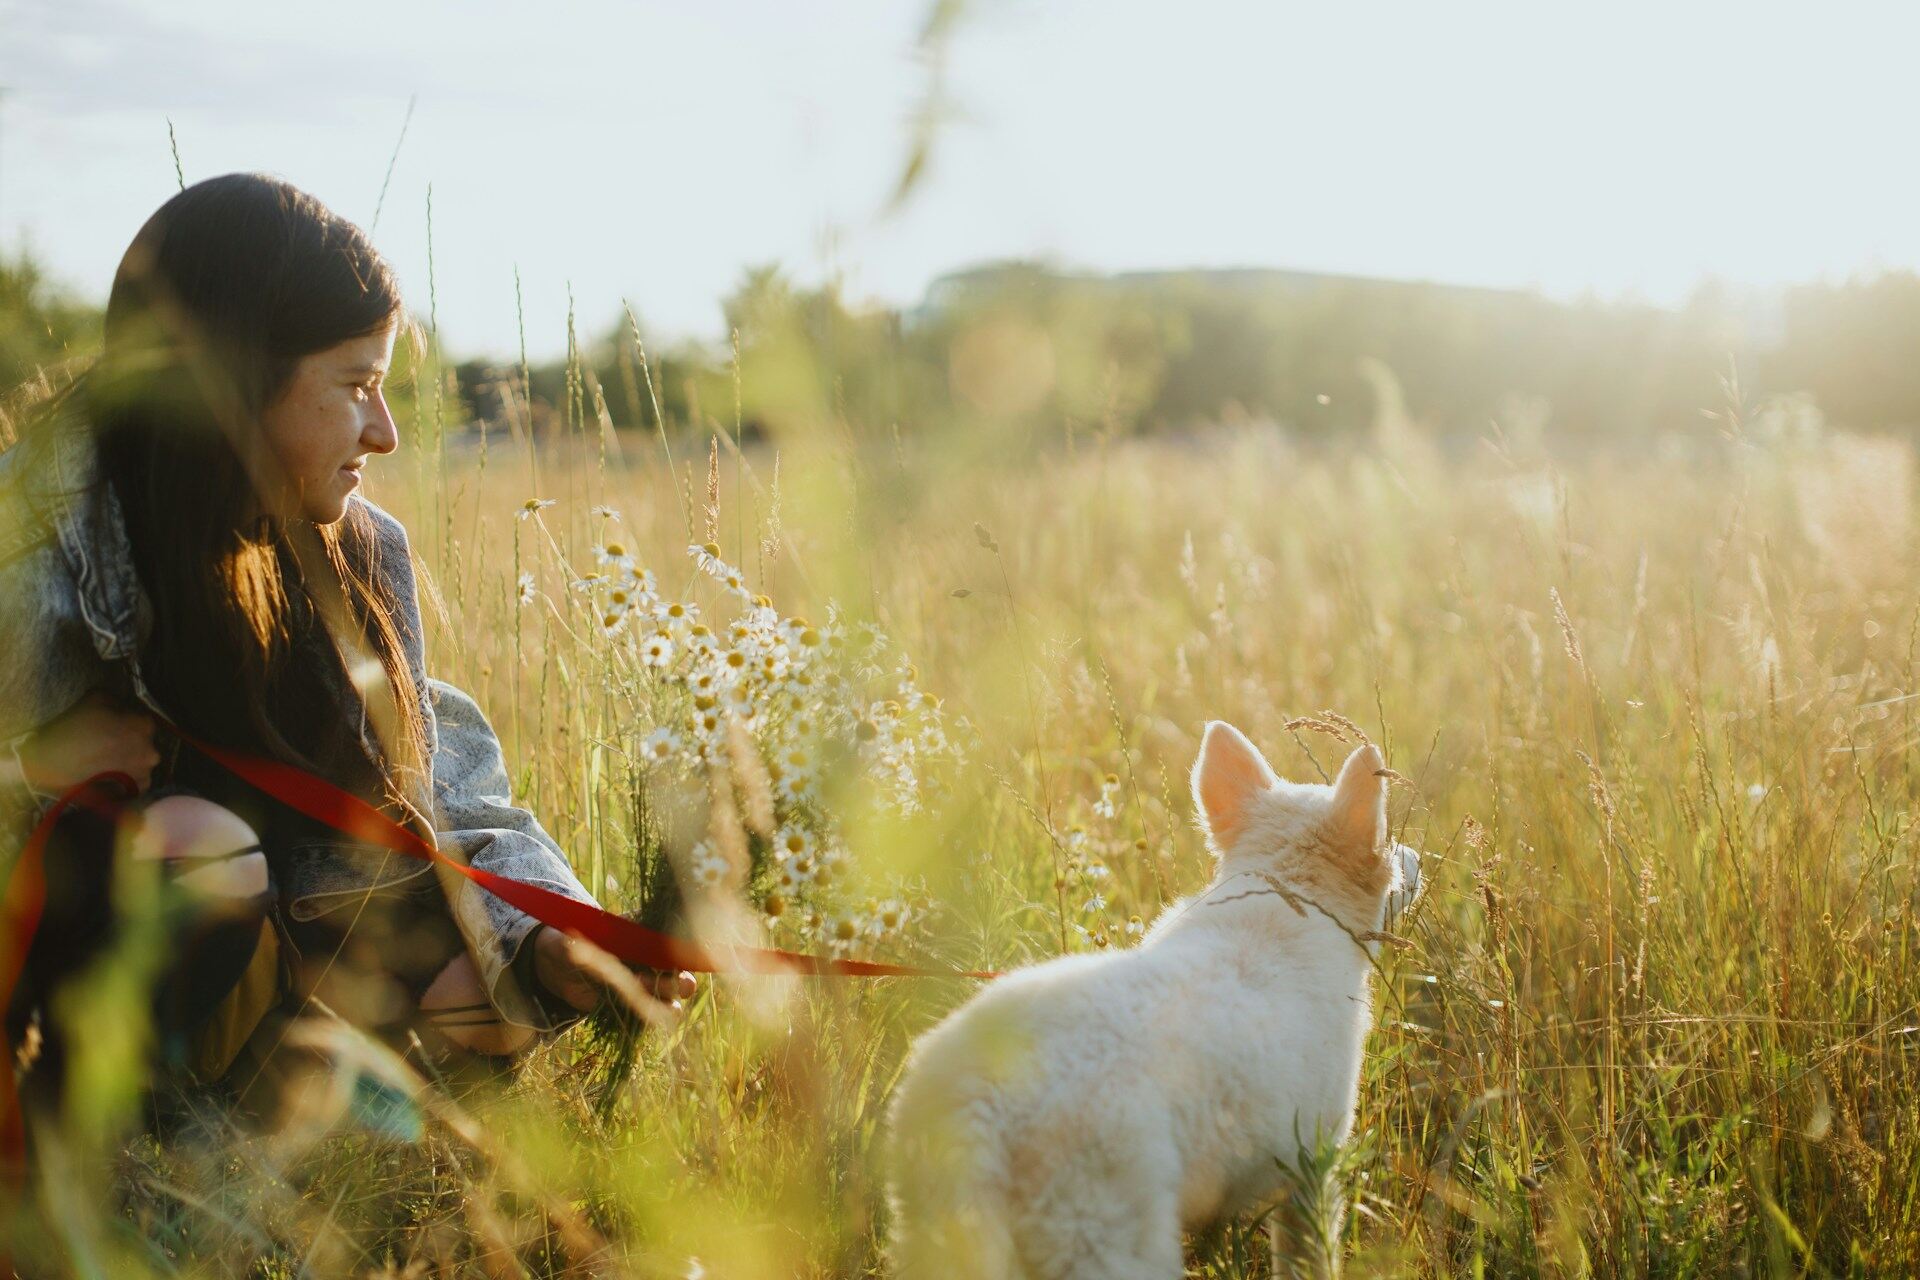 A woman and dog sitting outdoors in a sunny field